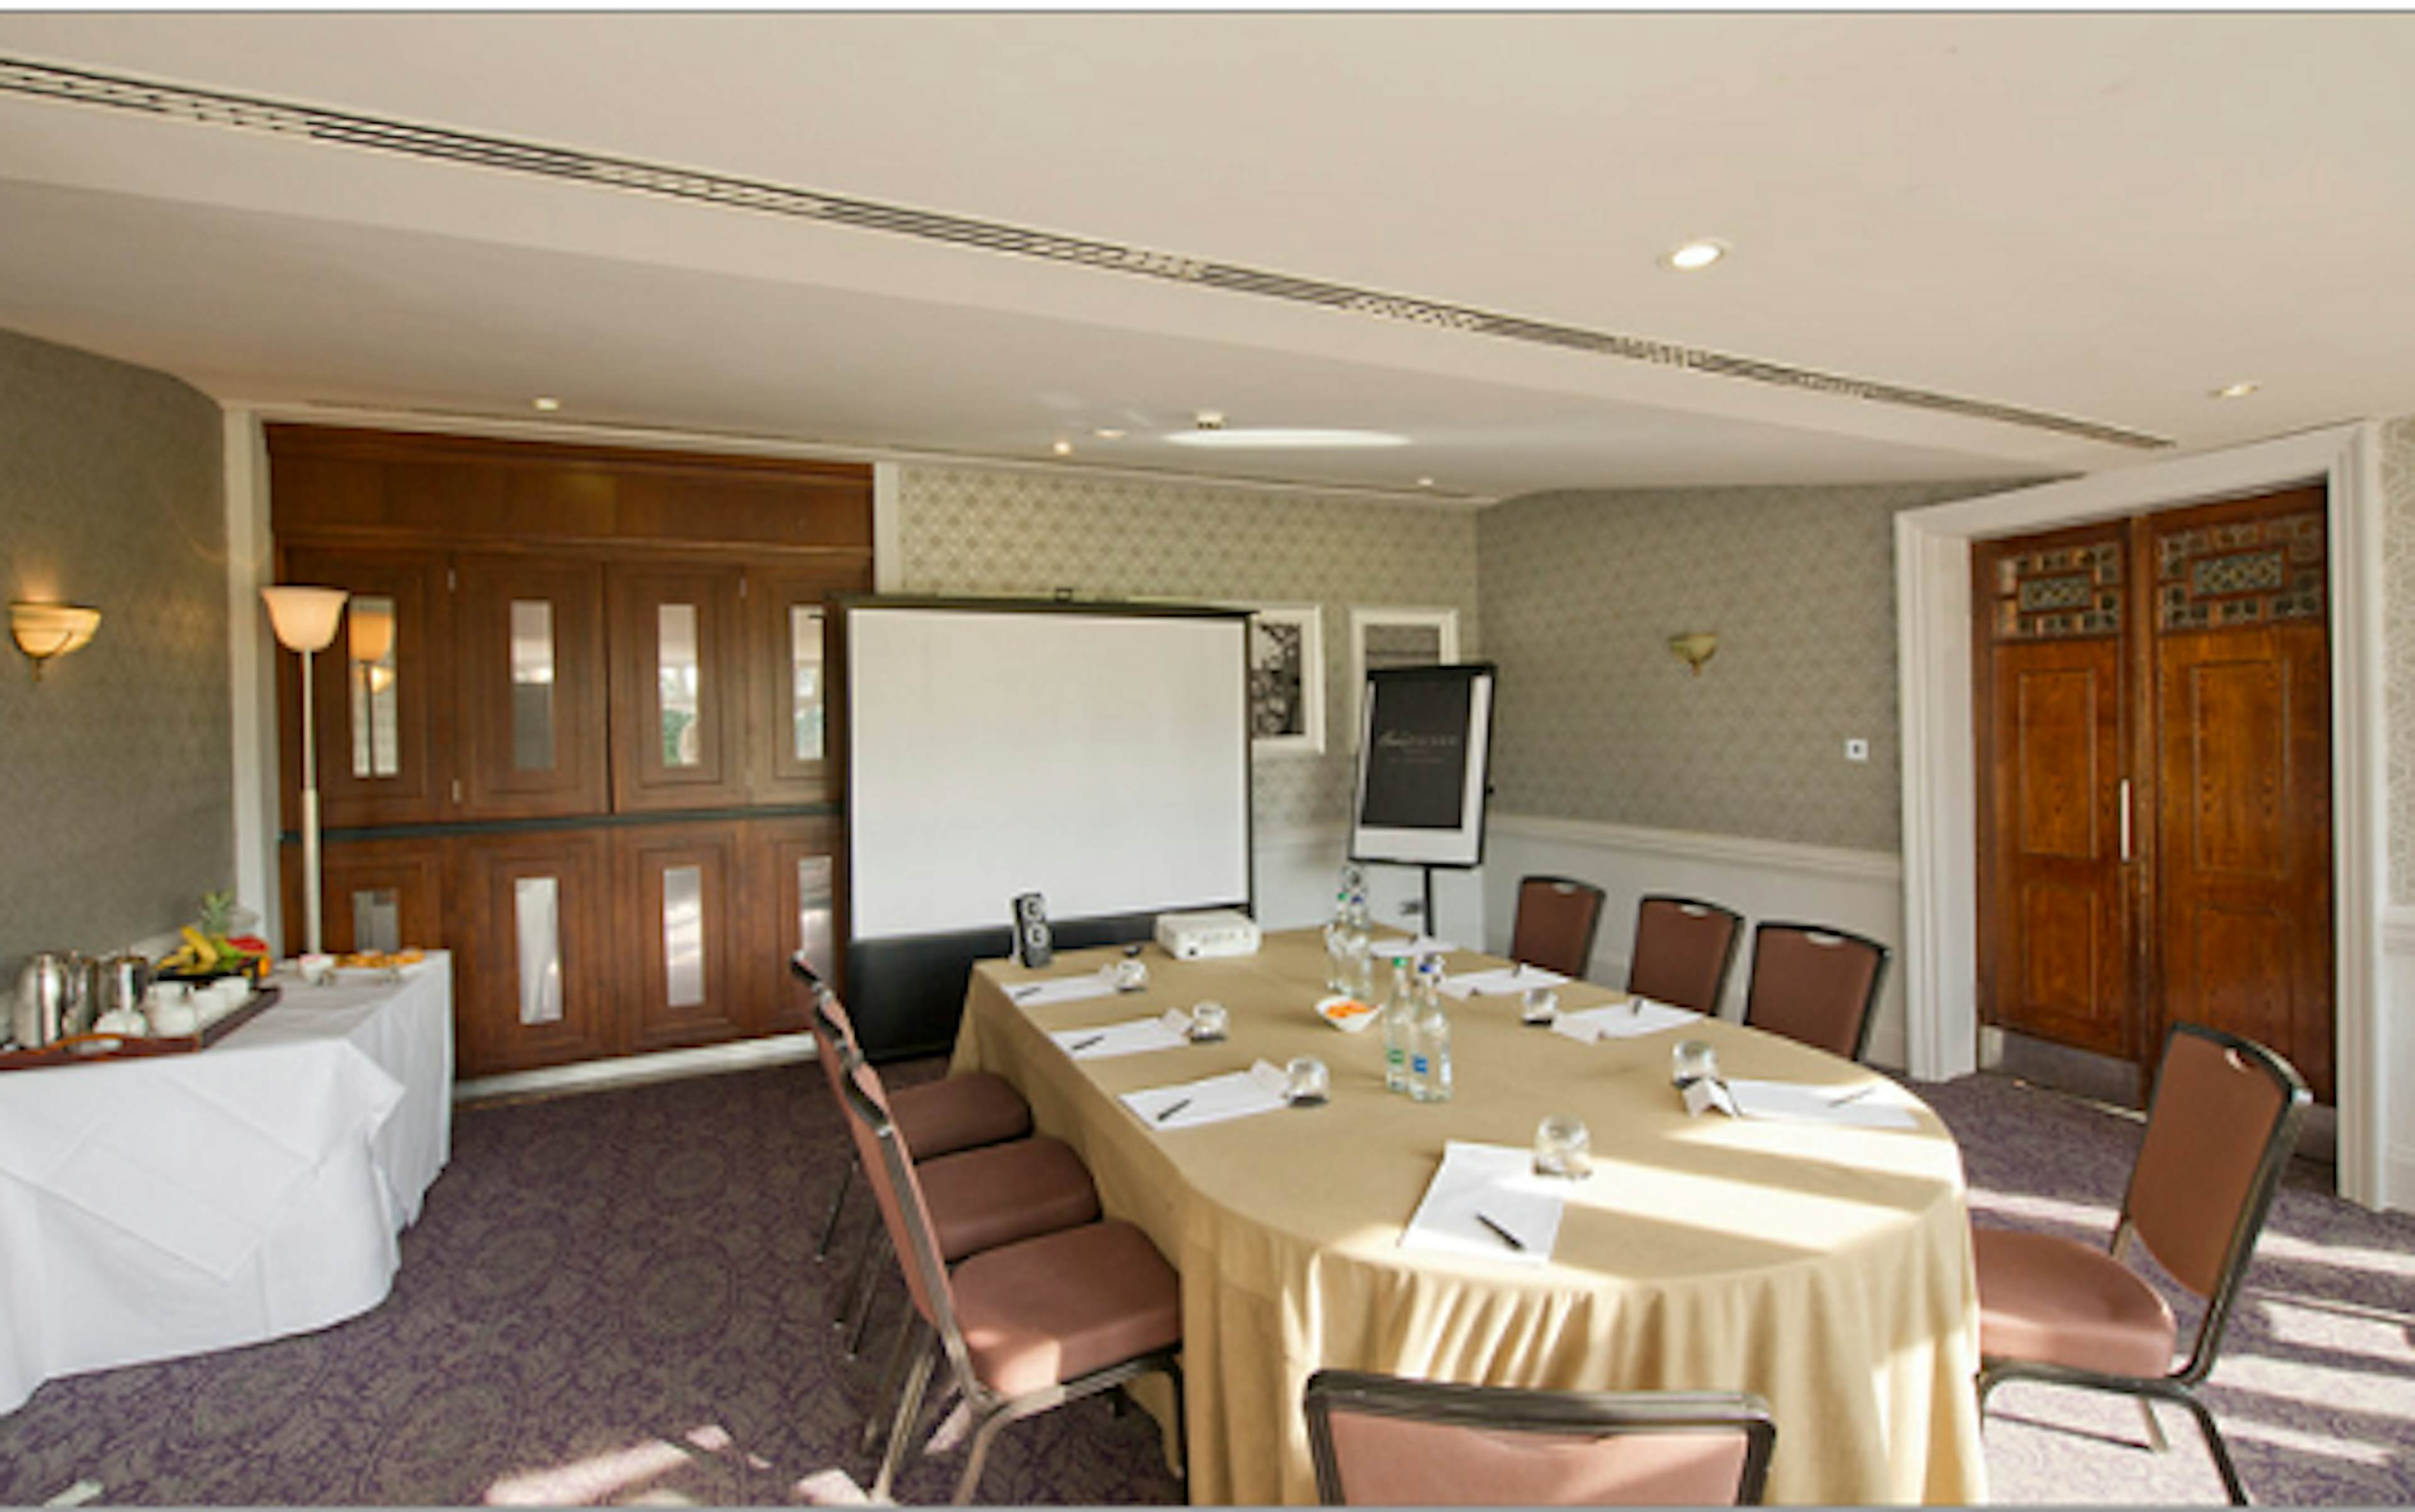 Woodlands Park Hotel - The Chester Suite image 1